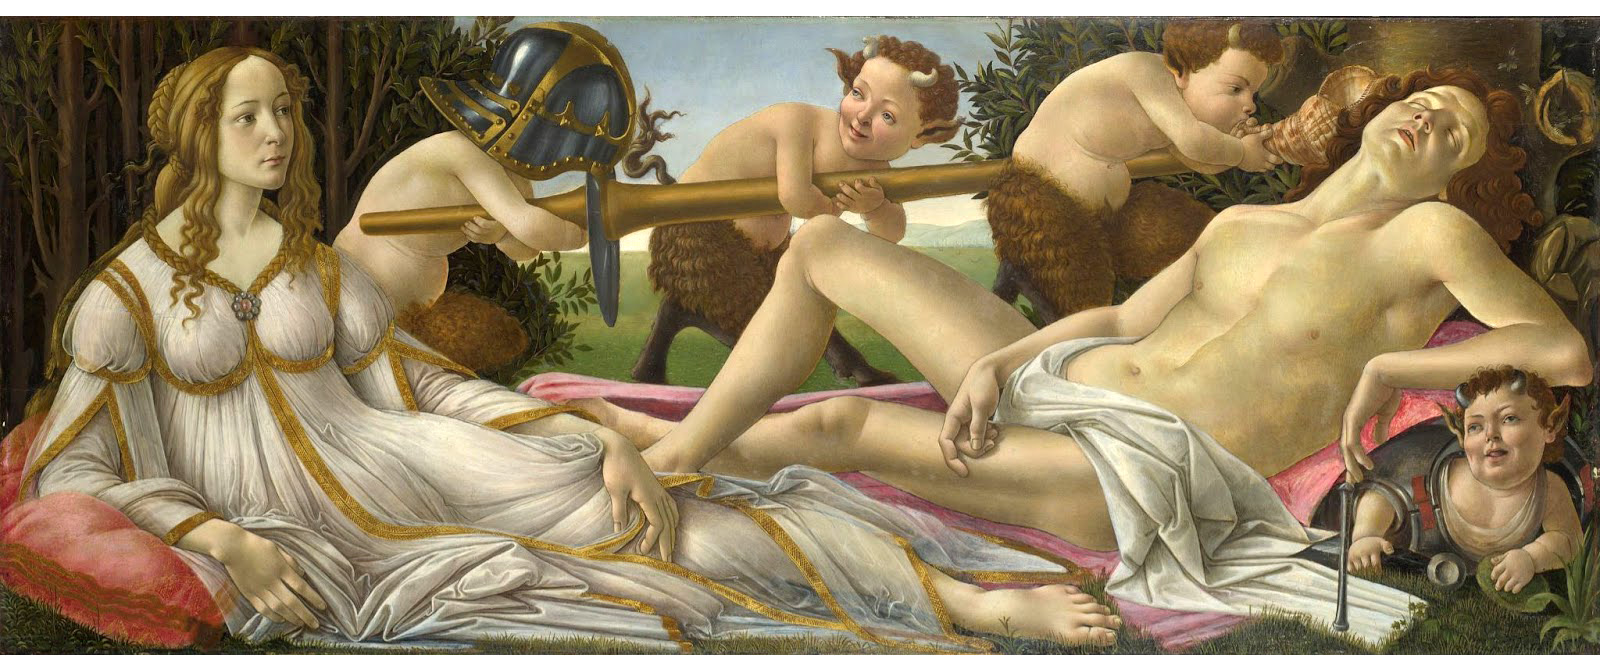 After a stormy night. About Botticelli's most immodest painting.